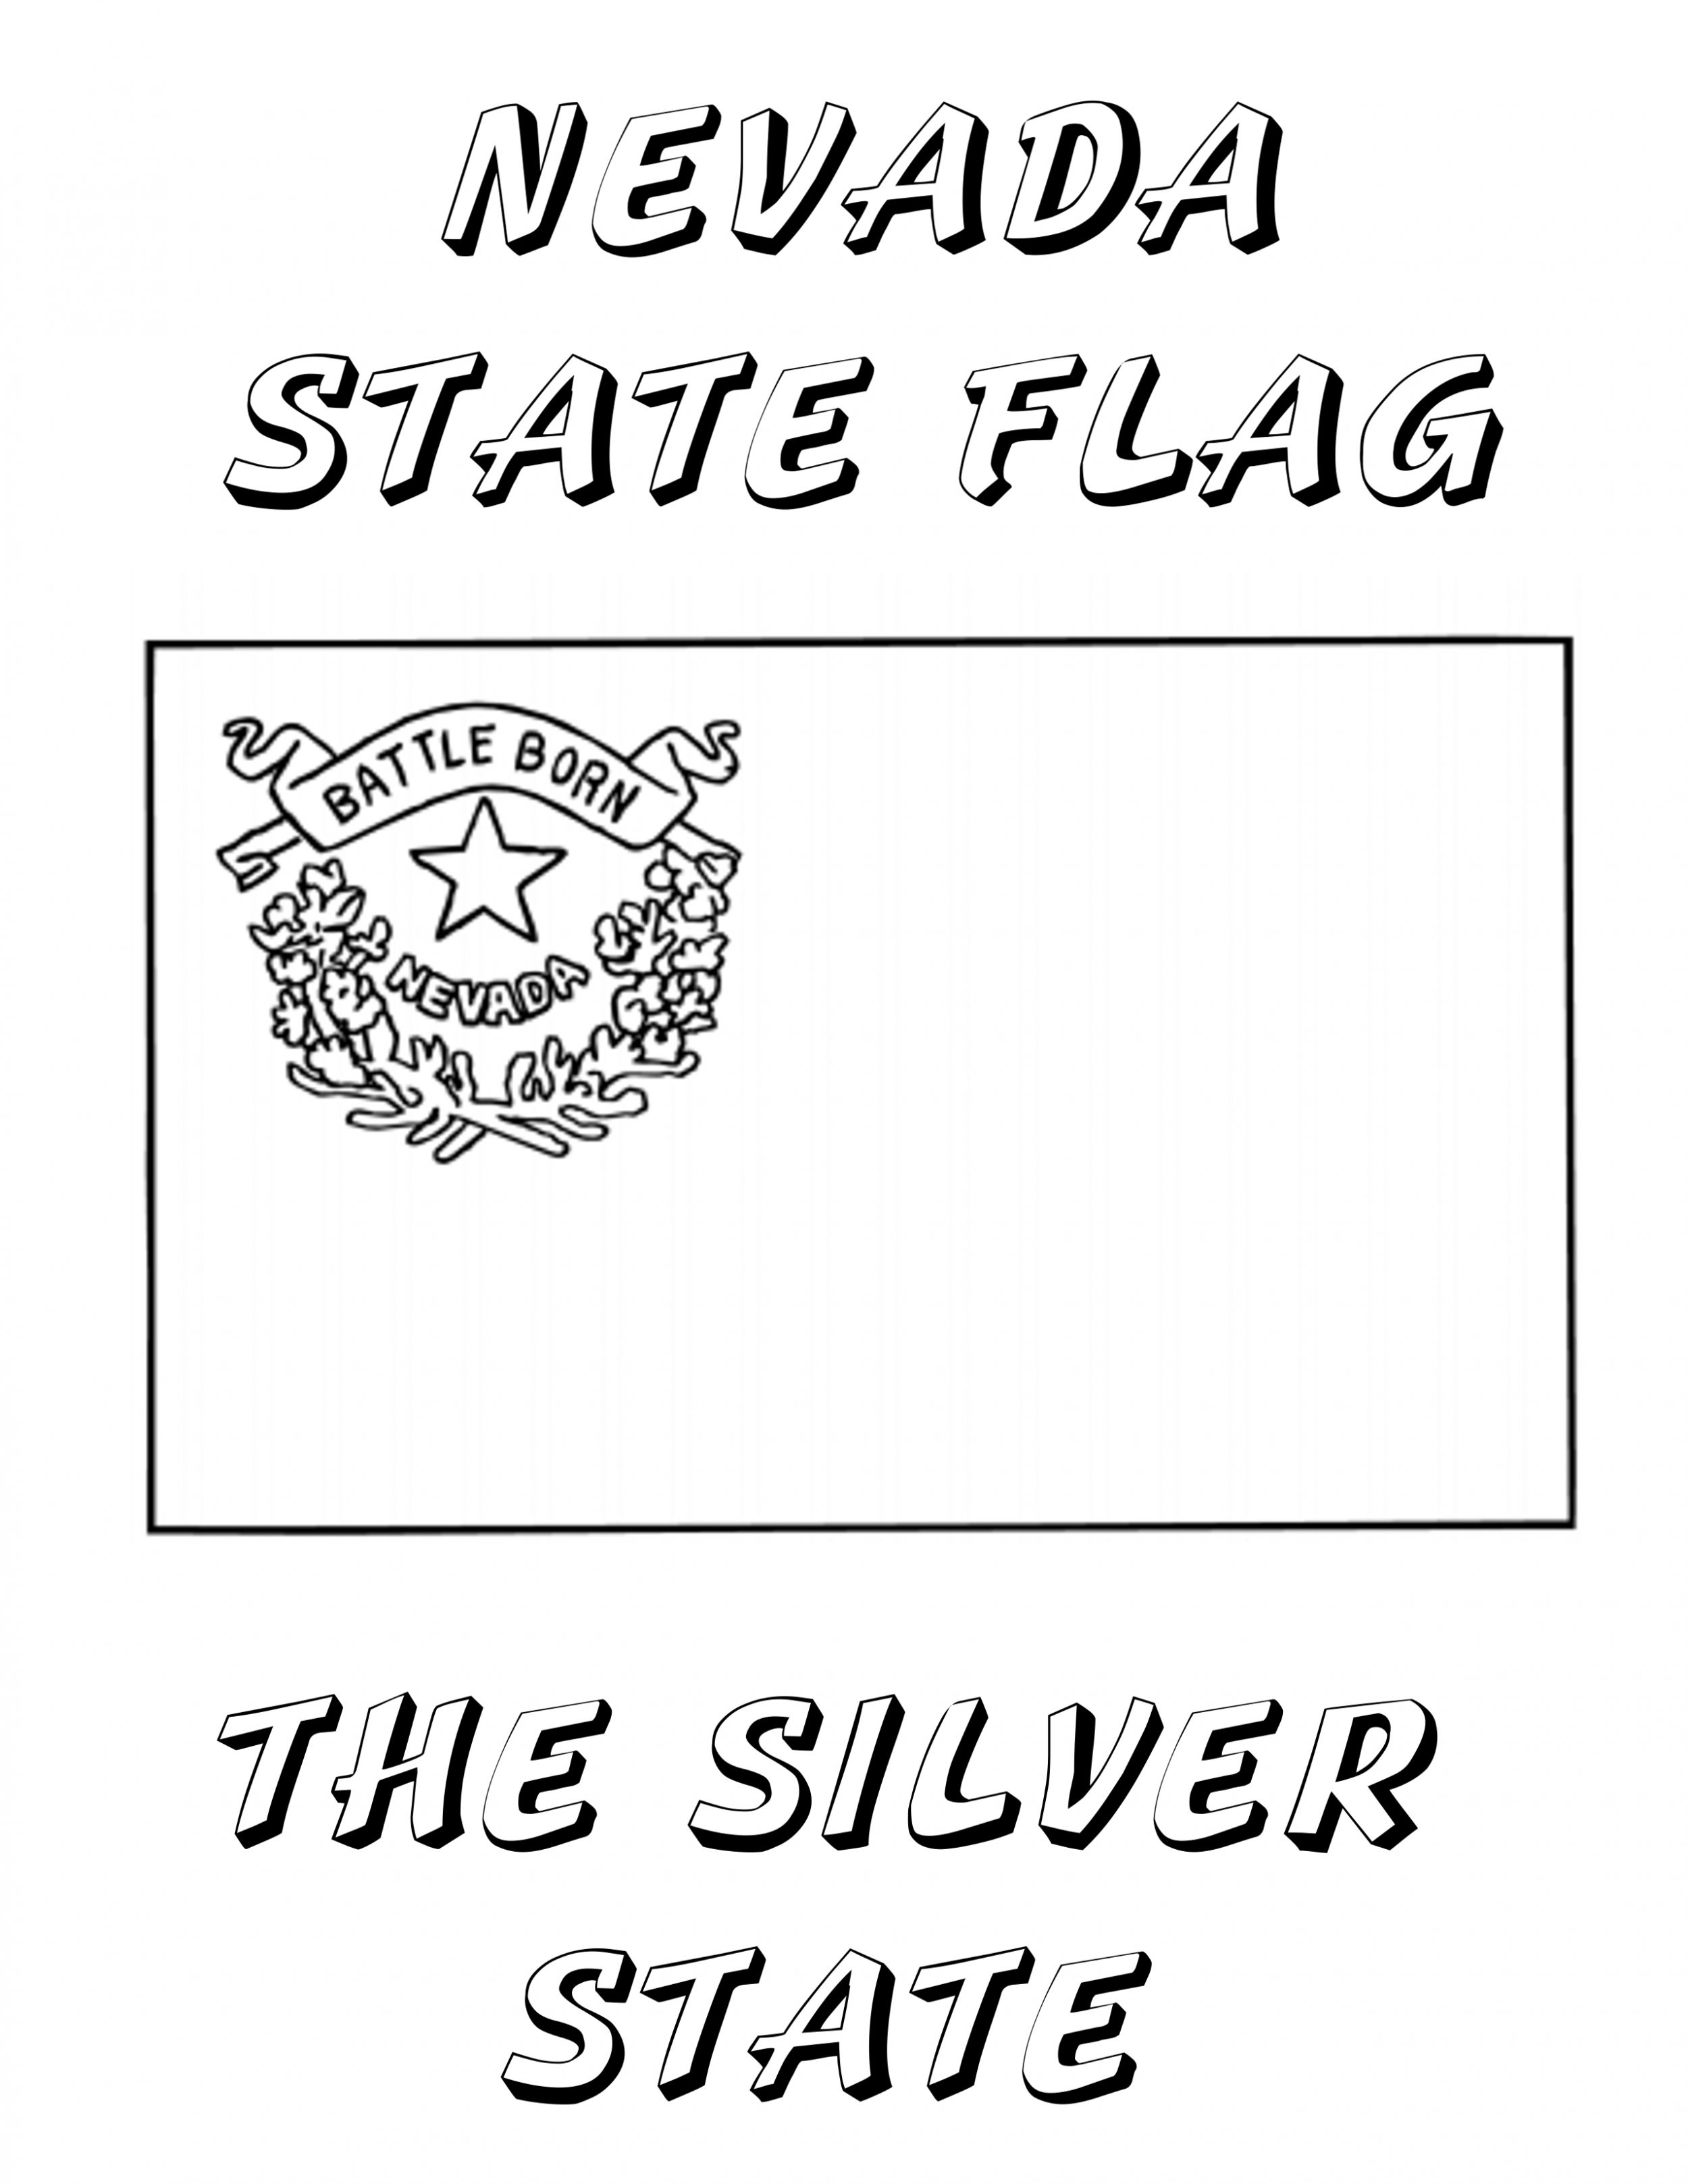 Nevada Day Coloring Book State Flag The Silver